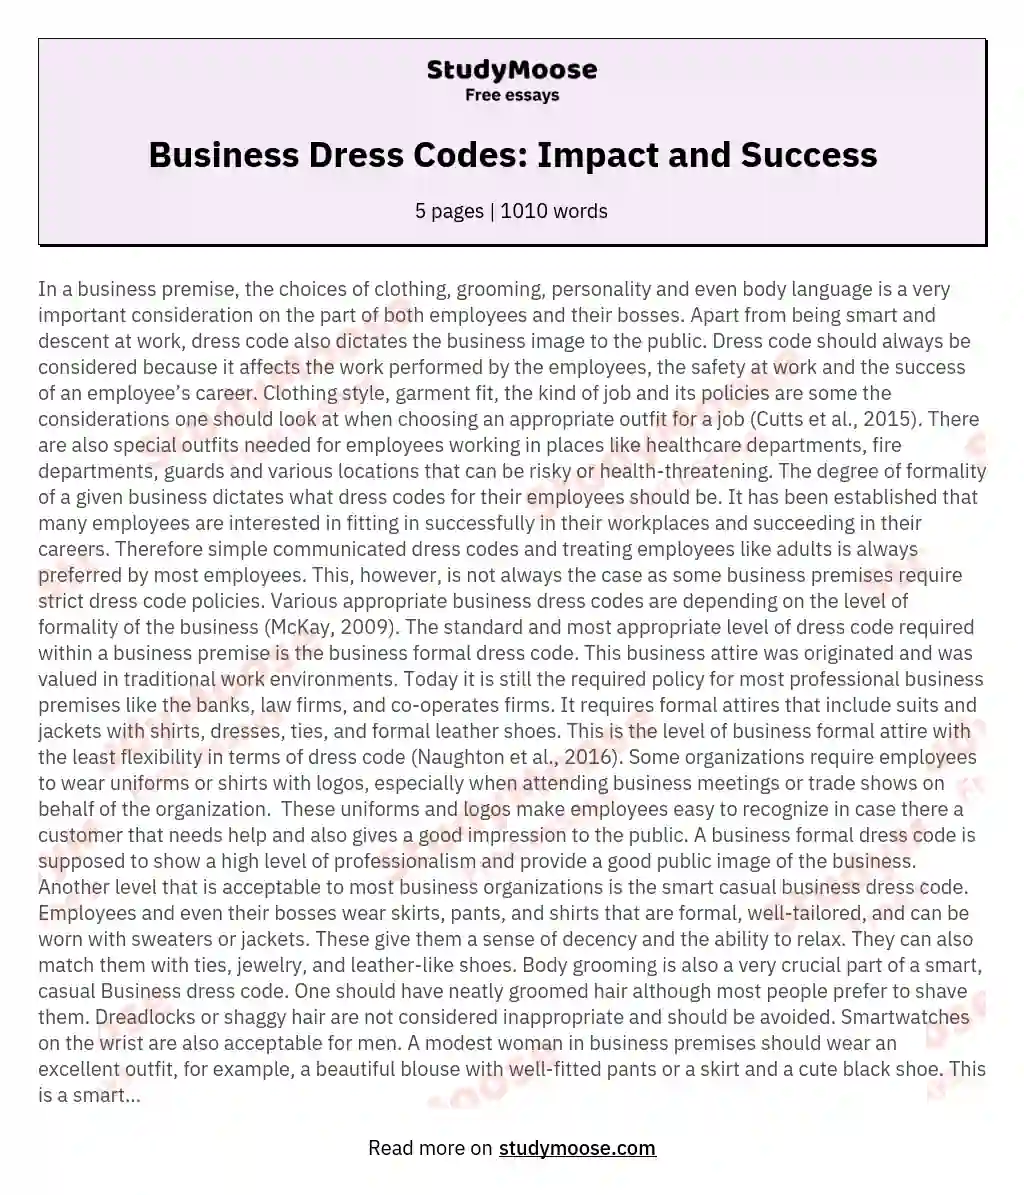 Dress Code in Business